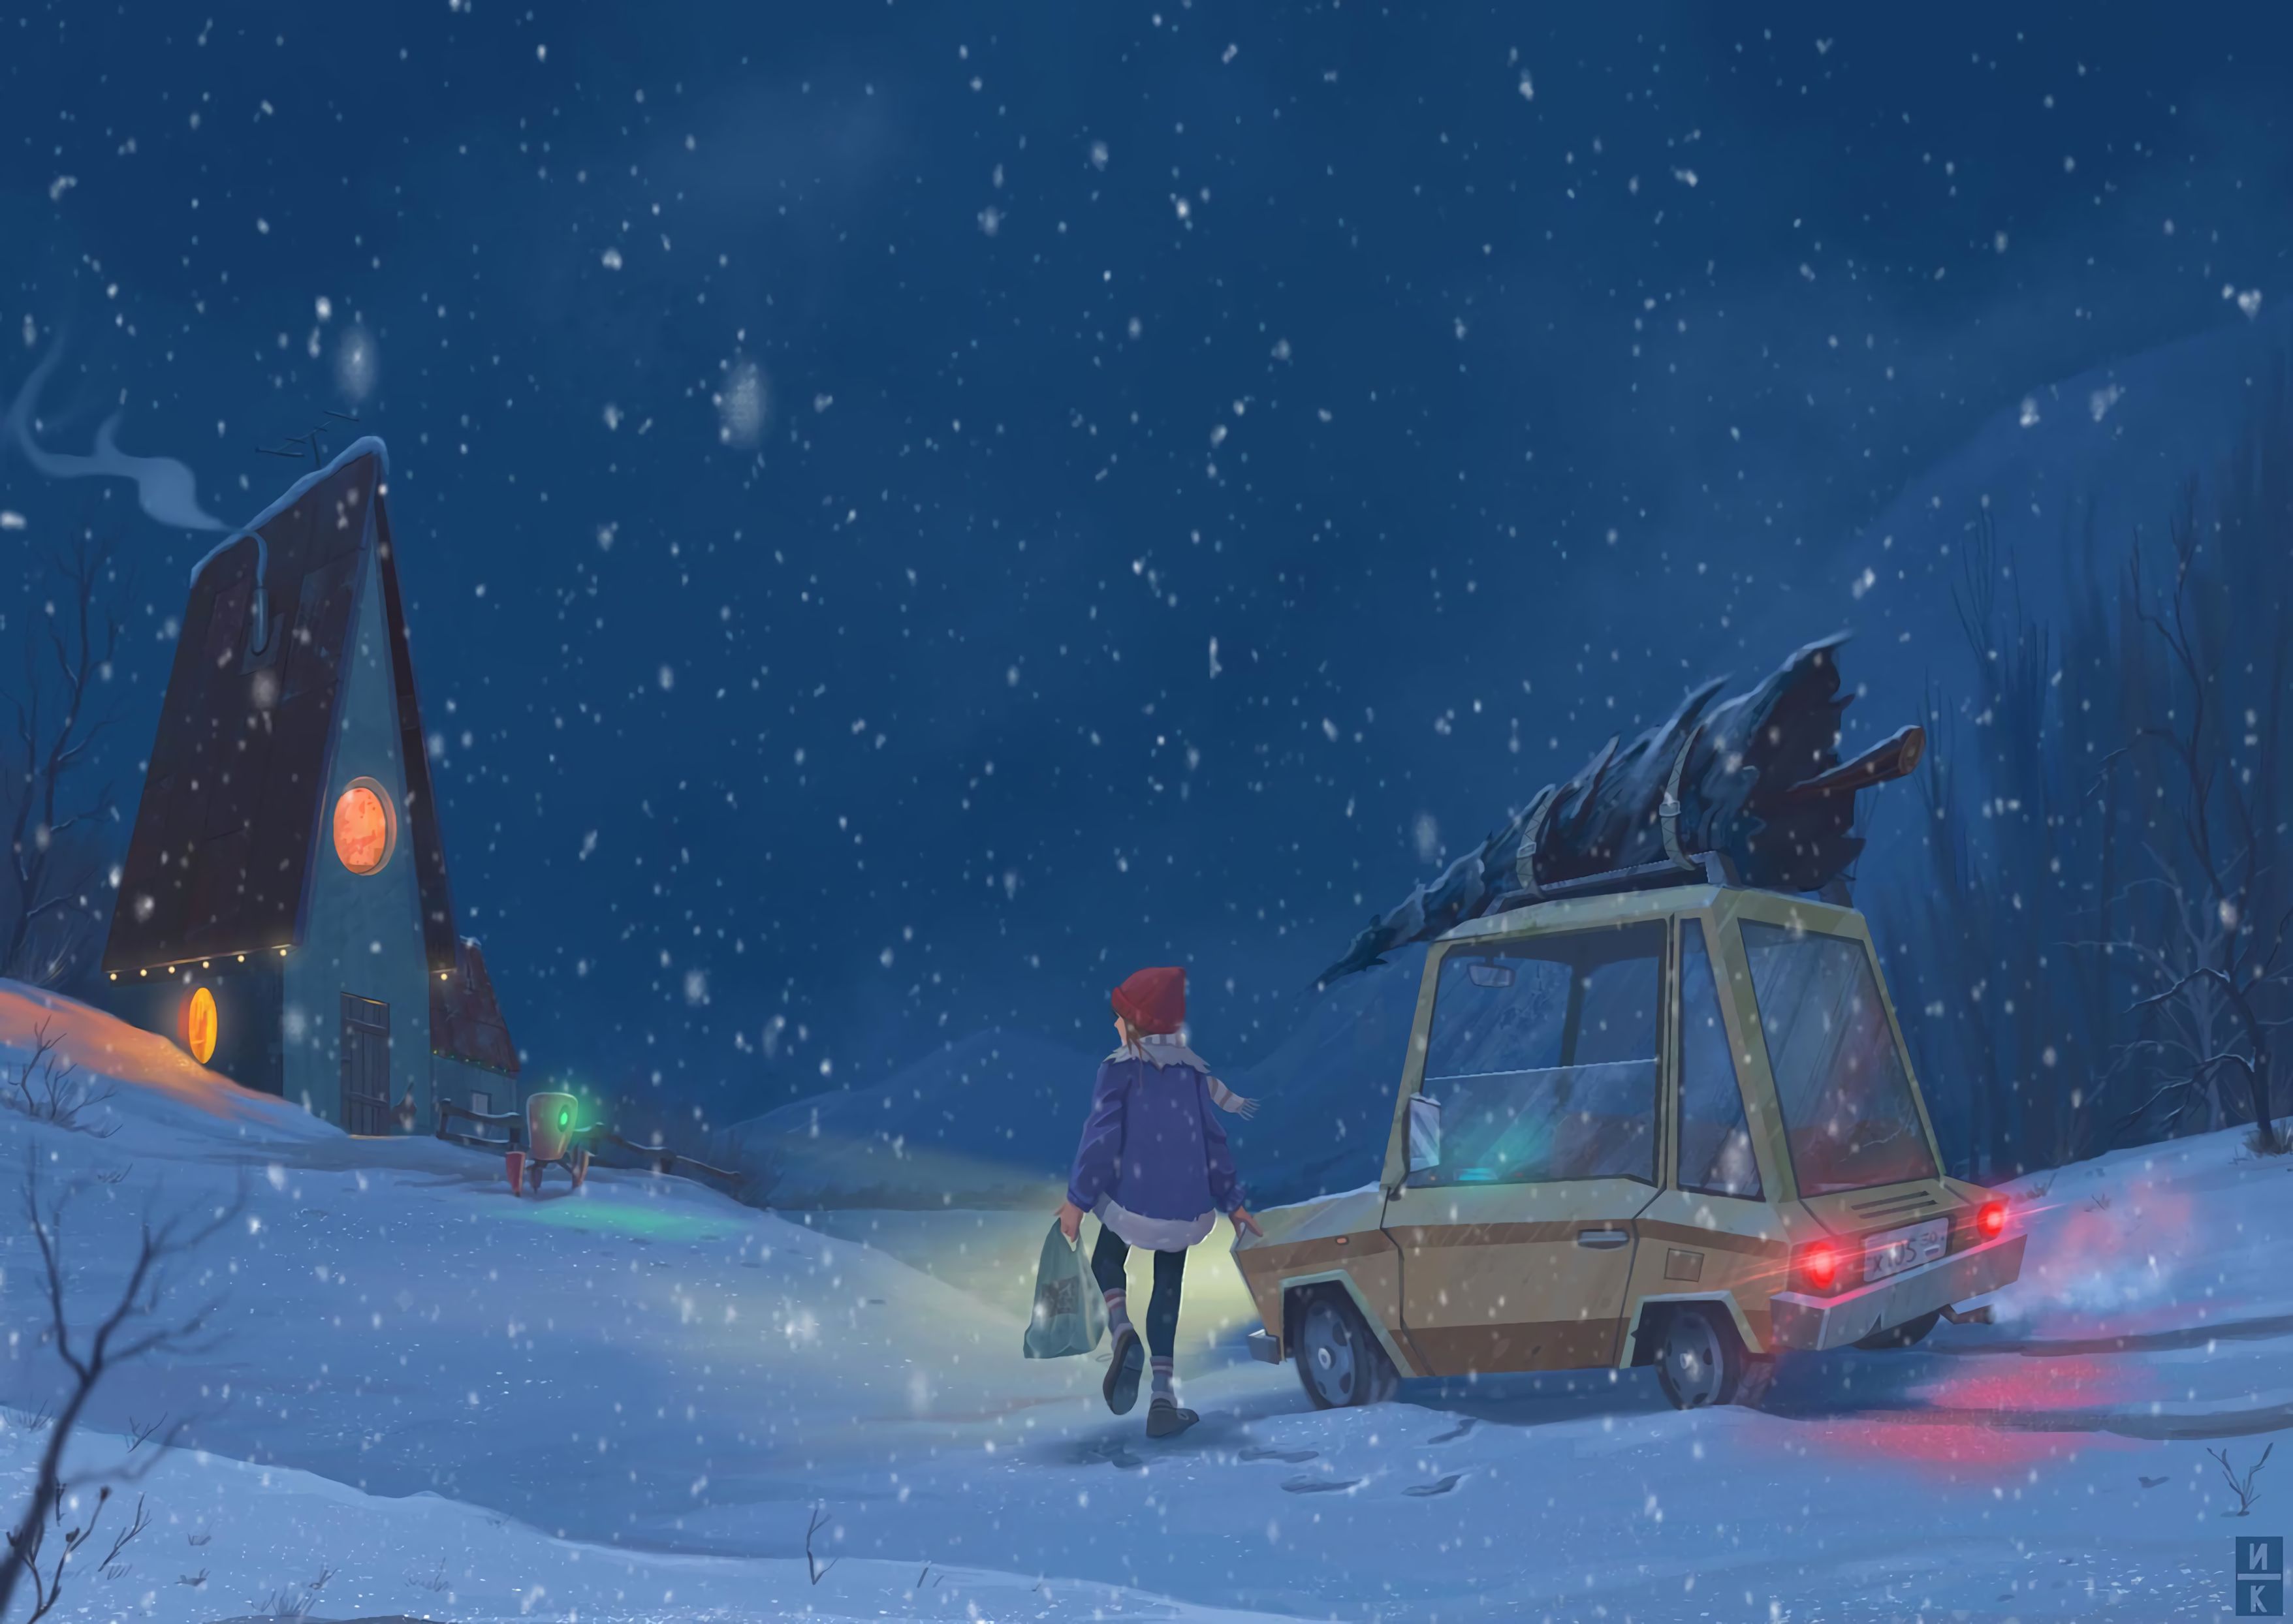 150785 download wallpaper winter, art, car, child, snowfall screensavers and pictures for free